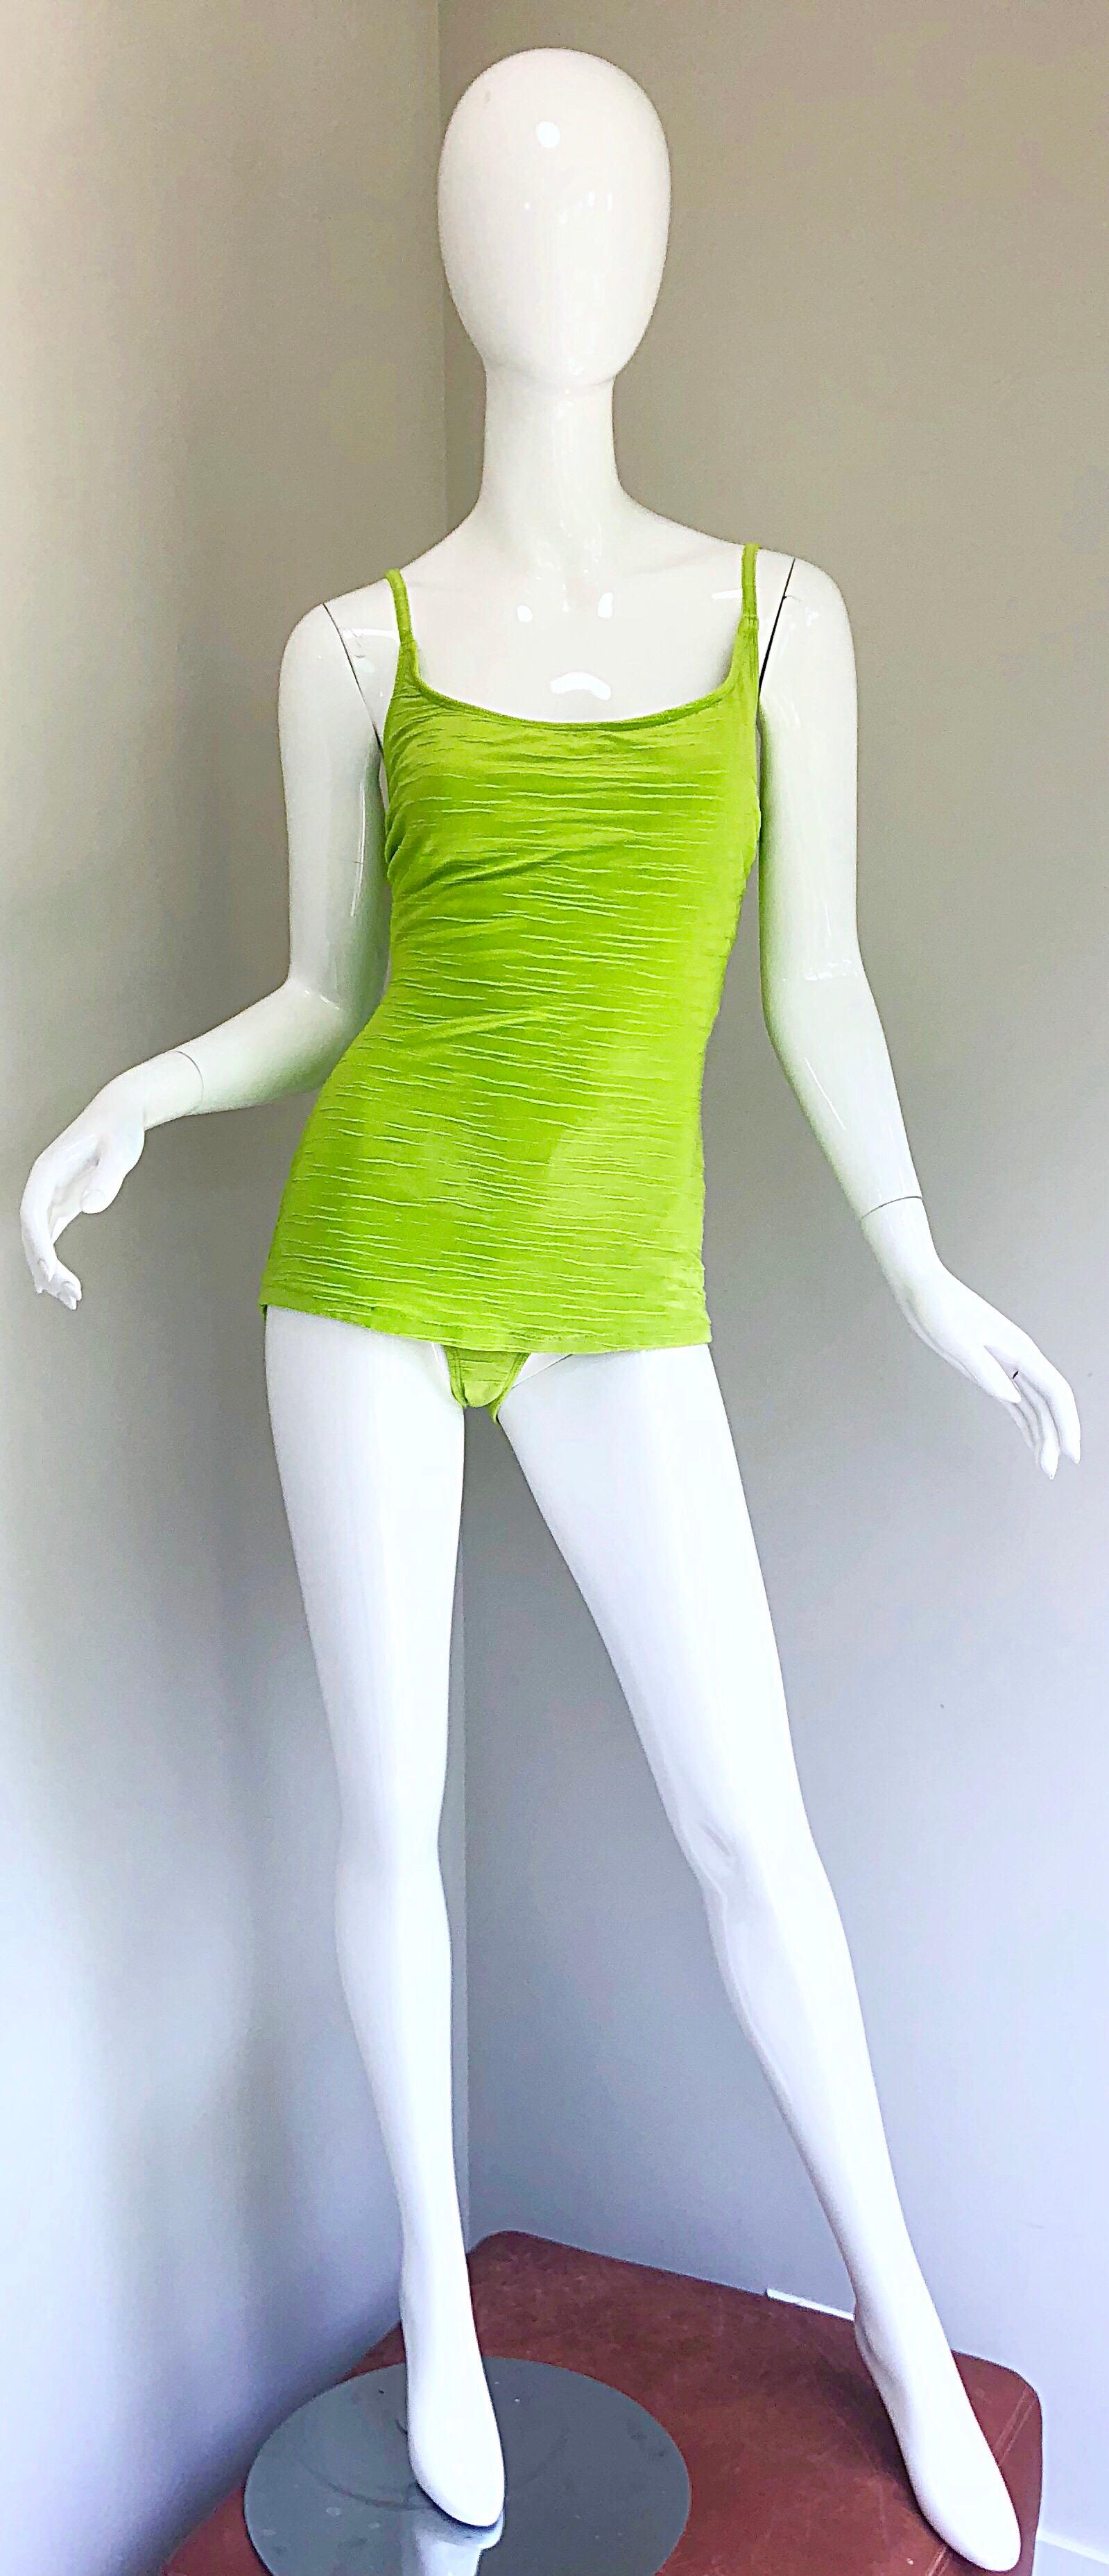 Chic early 2000s does 1960s OSCAR DE LA RENTA neon lime green one piece Size 14 swimsuit or bodysuit! Features a flattering boy cut front that hides any problem areas. Straps can be switched to a racerback for added support. A great pop of color